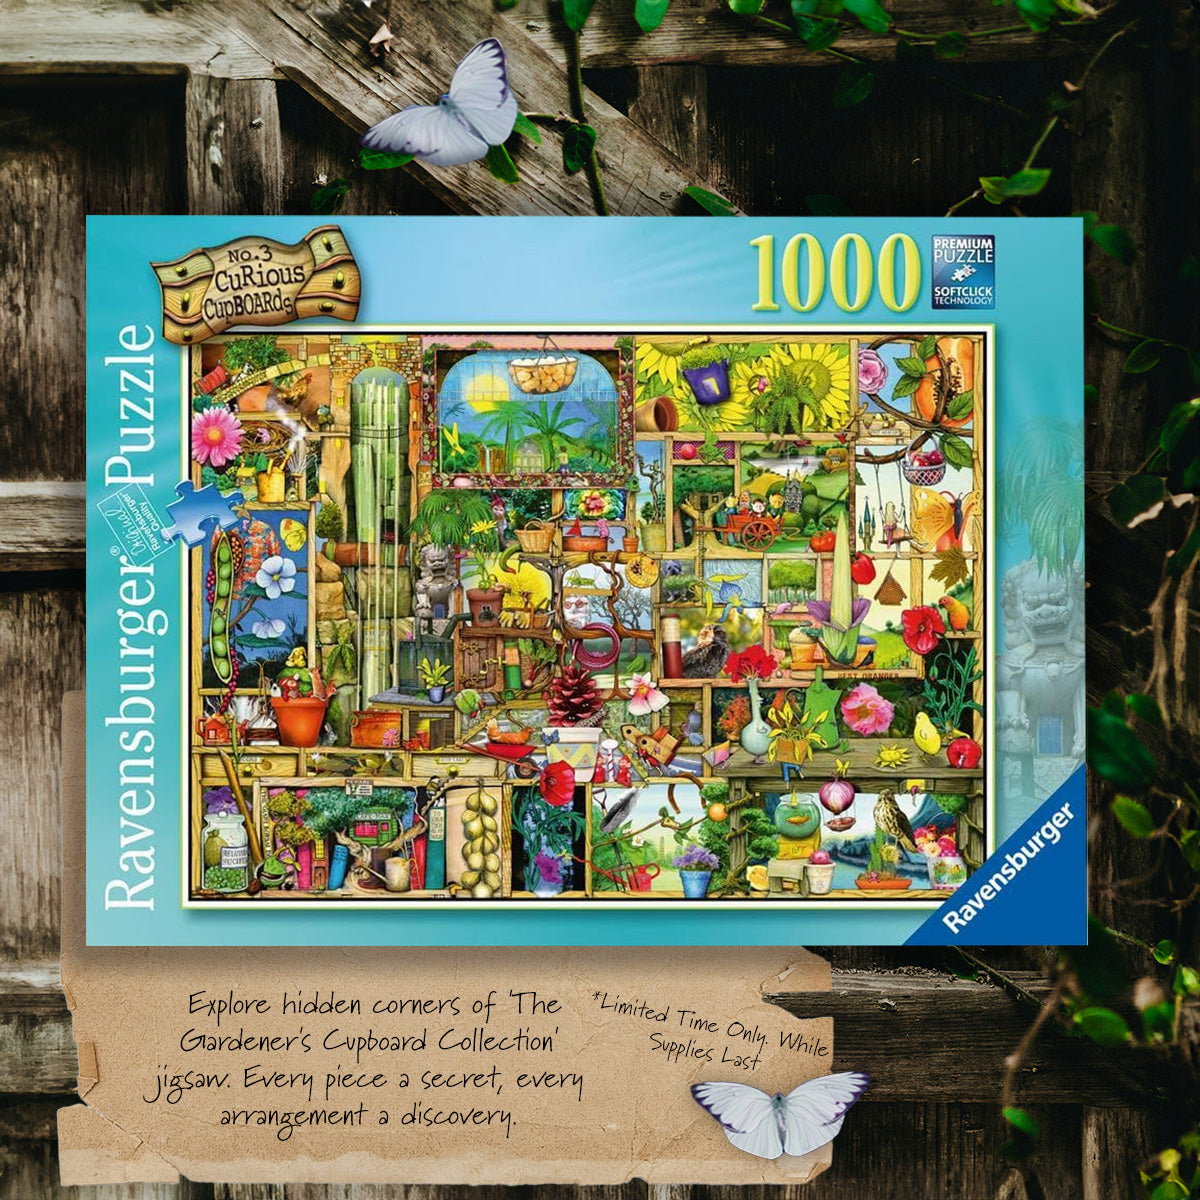 The Gardeners Cupboard 1000 Piece Puzzle by Ravensburger.